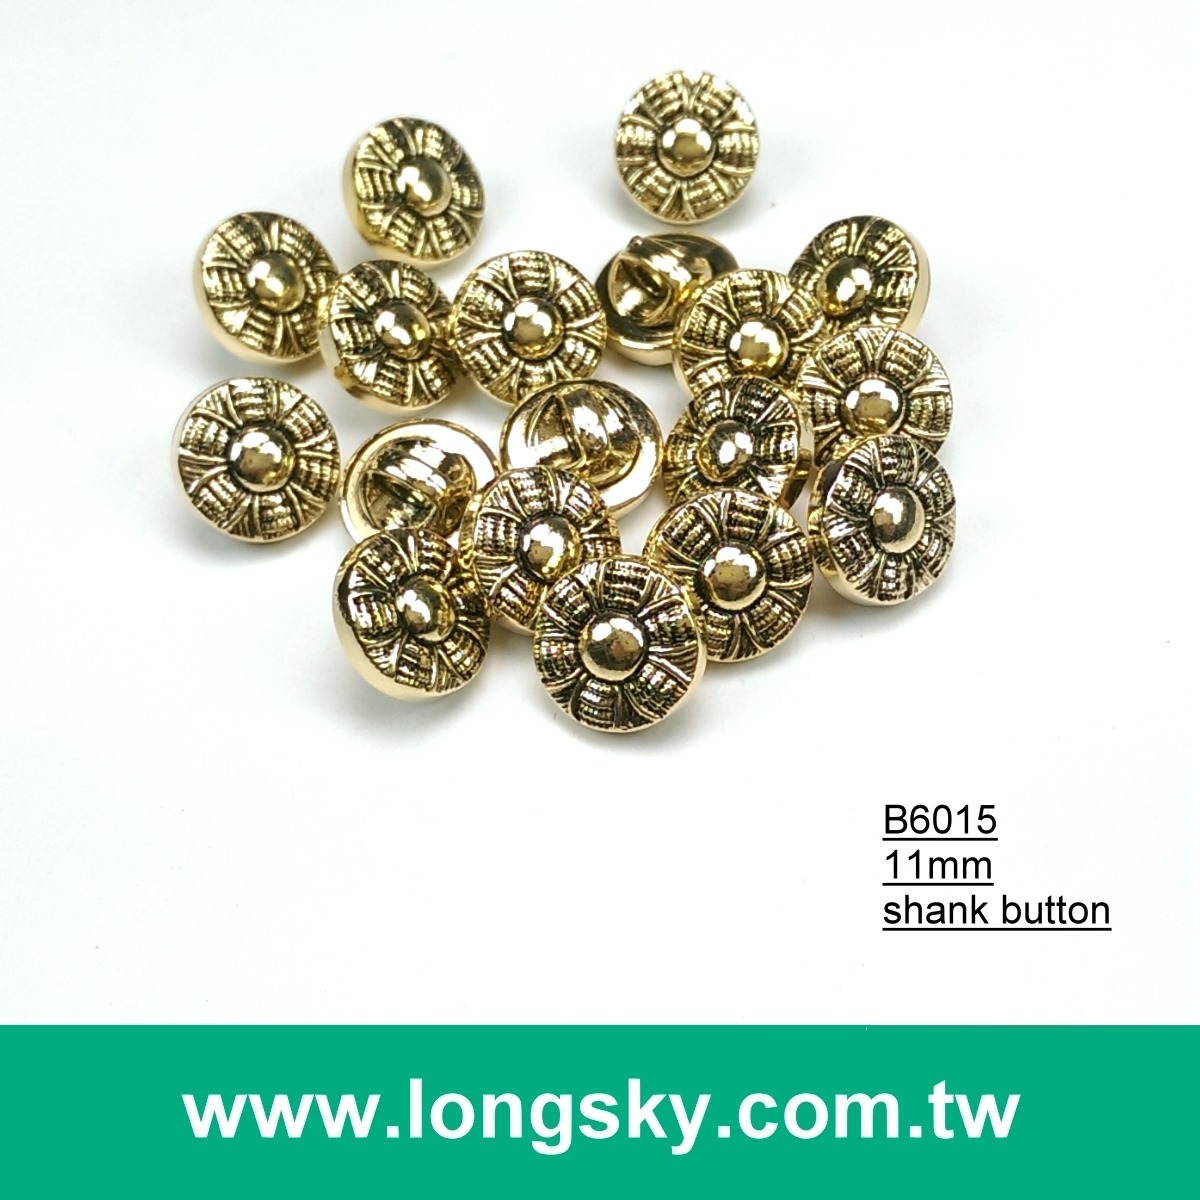 (#B6015/11mm) Taiwan fancy antique gold 17L small shirt buttons with shank